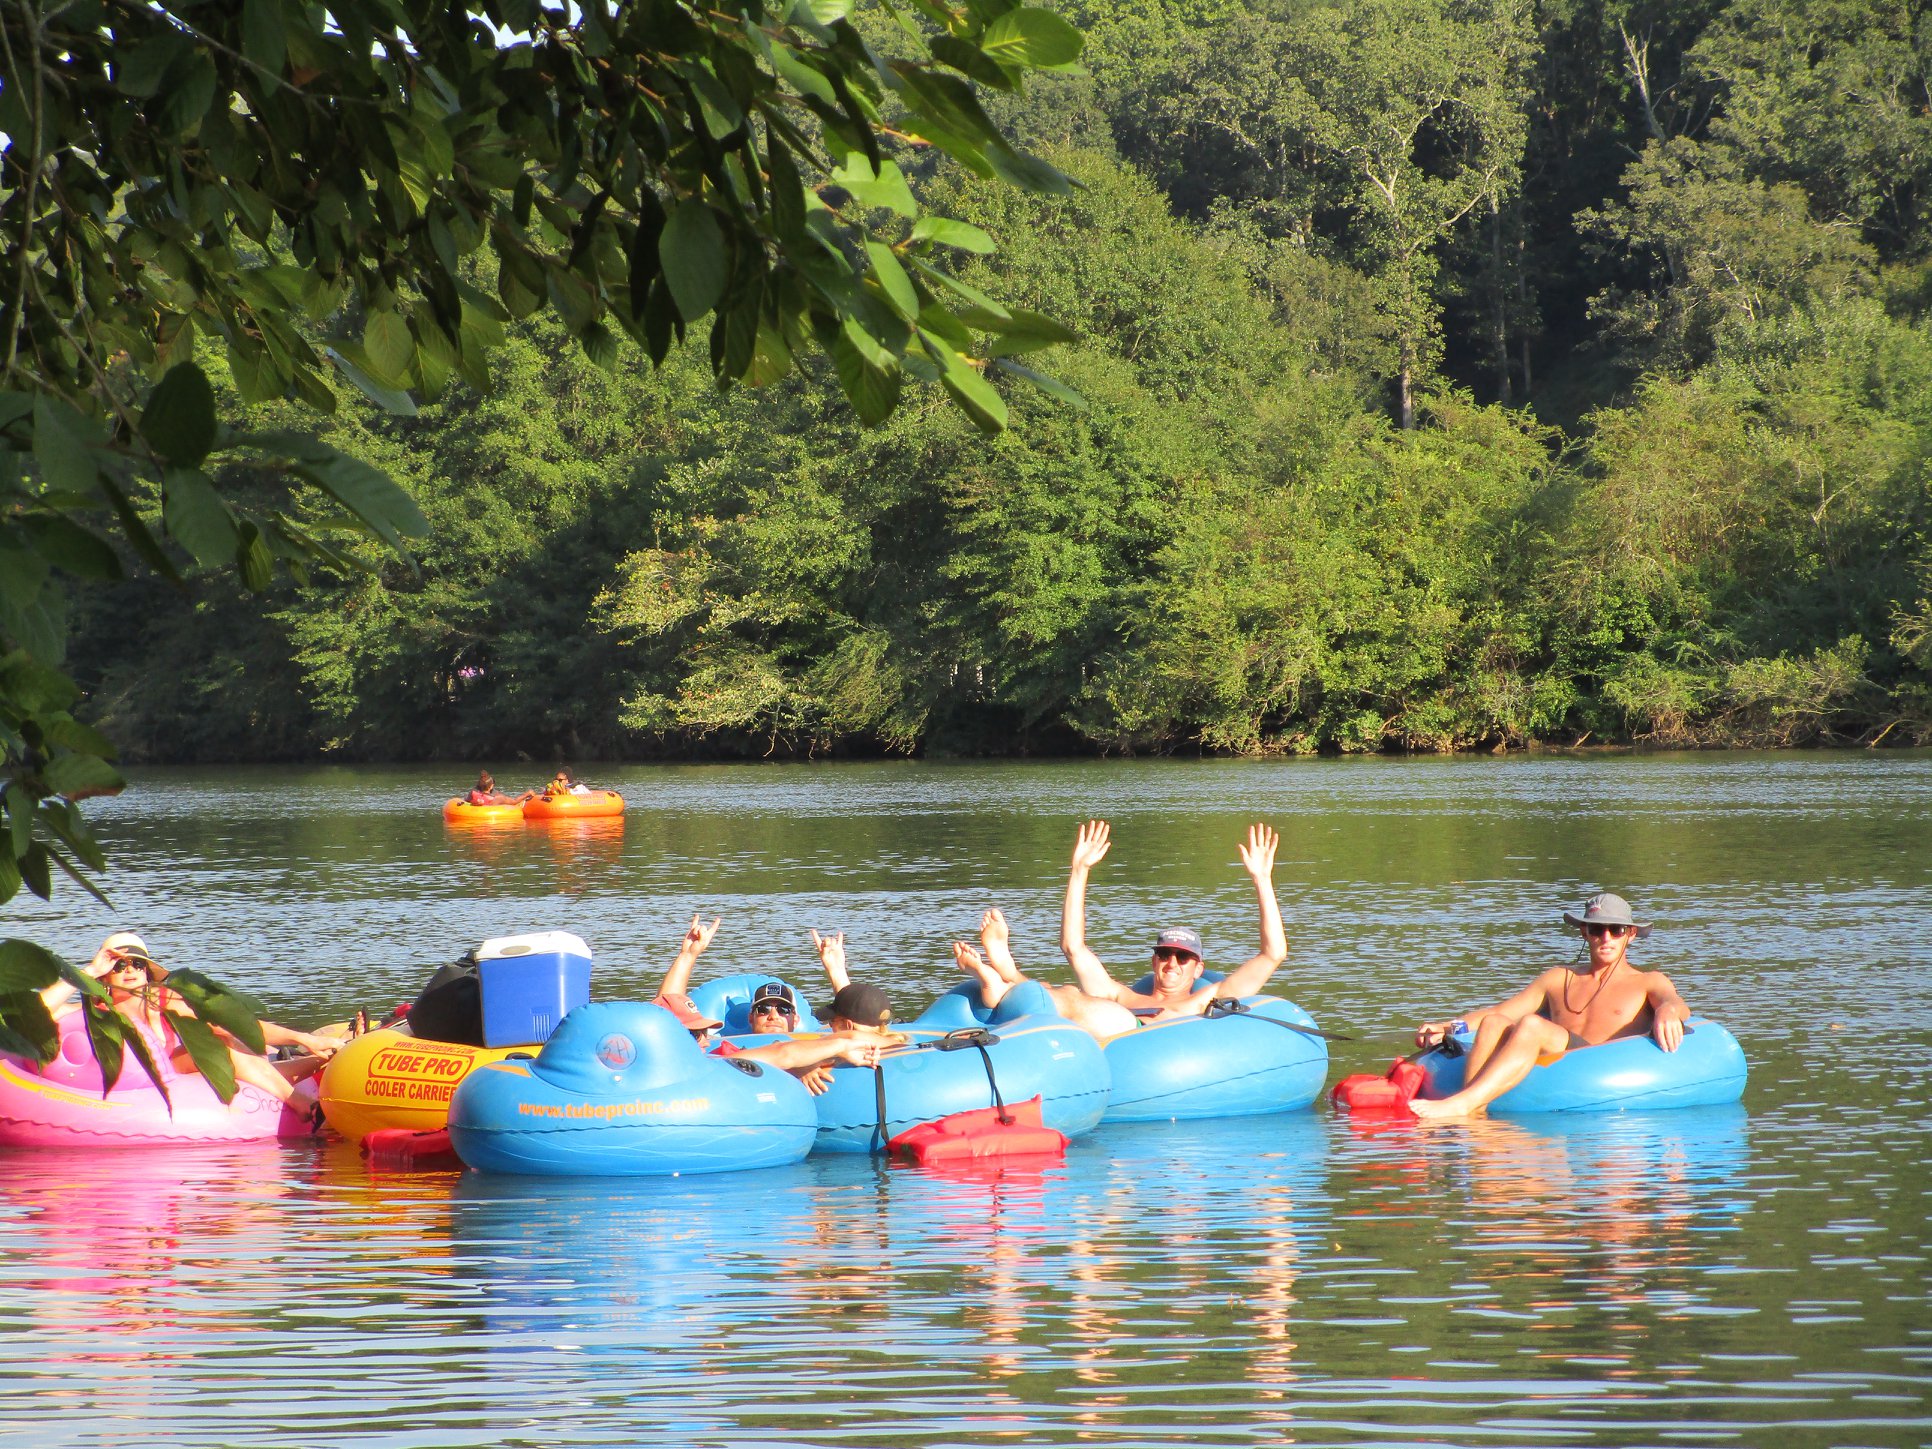 A group of people river tubing on the Chattahoochee in Atlanta